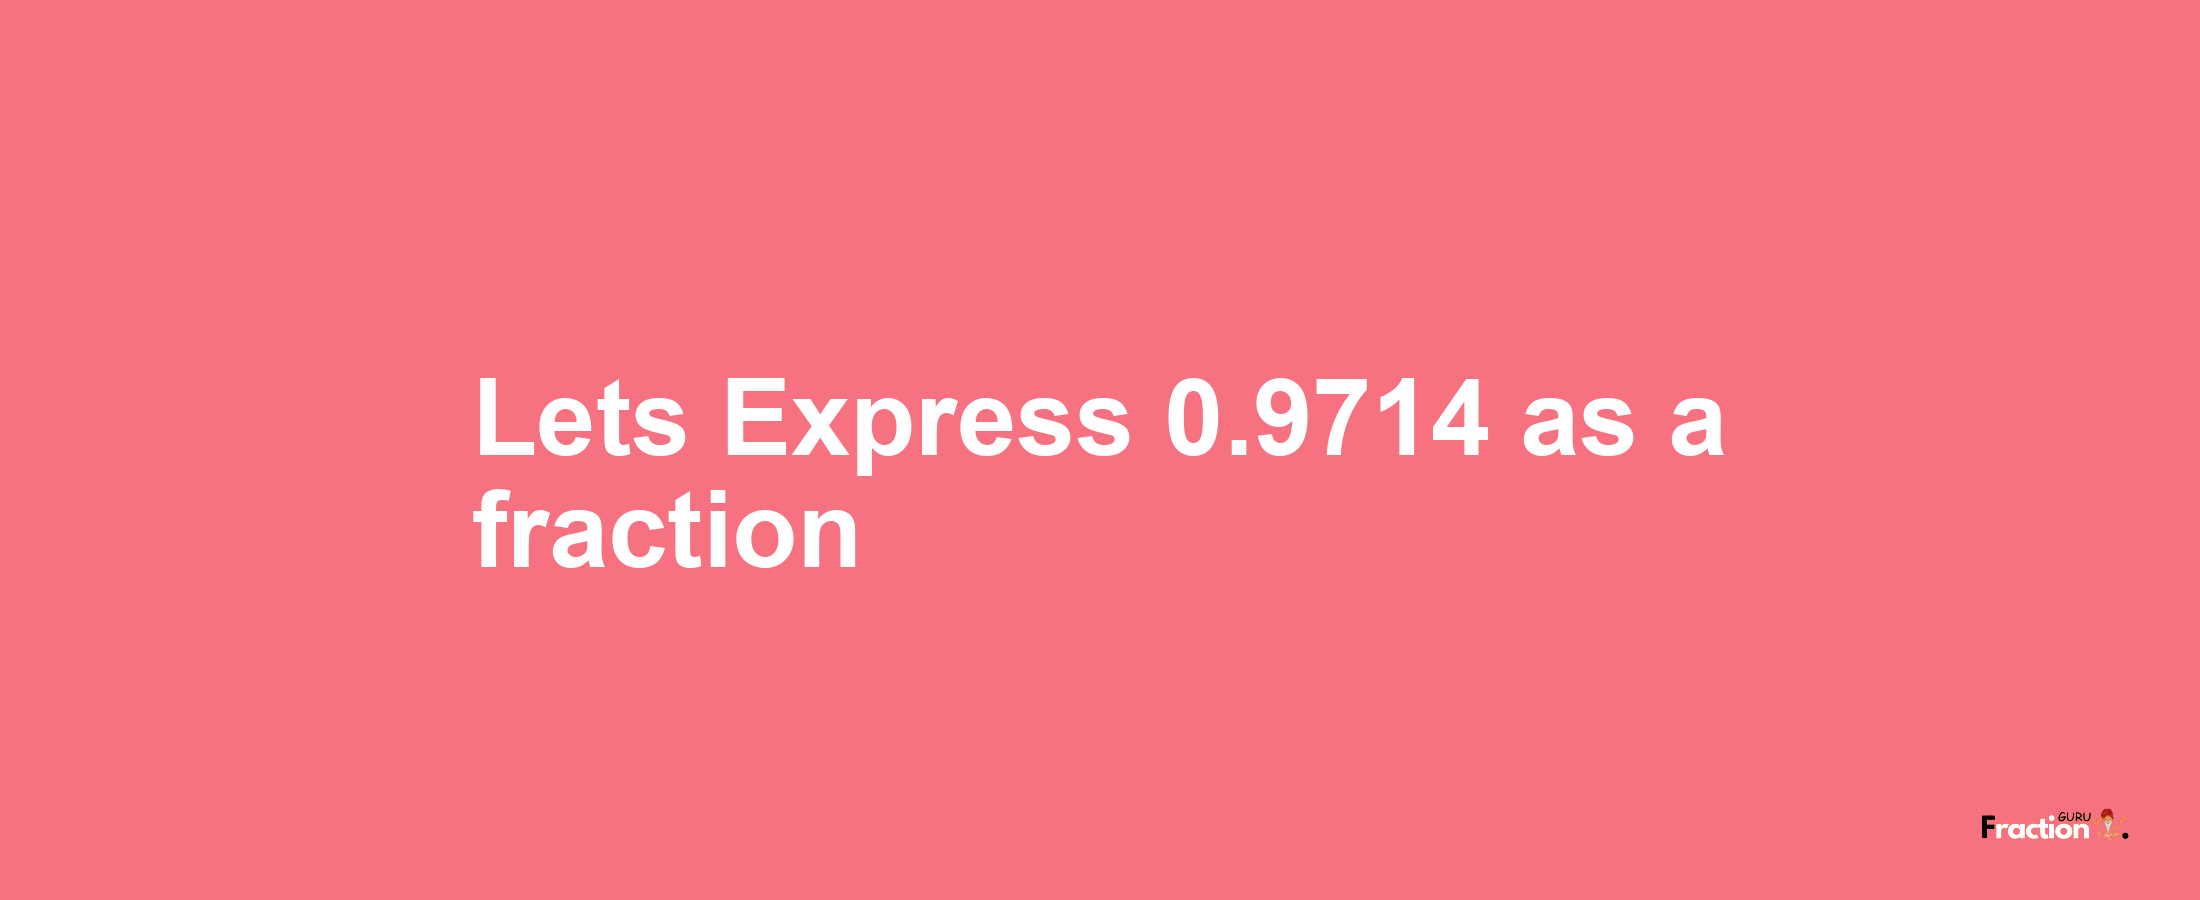 Lets Express 0.9714 as afraction